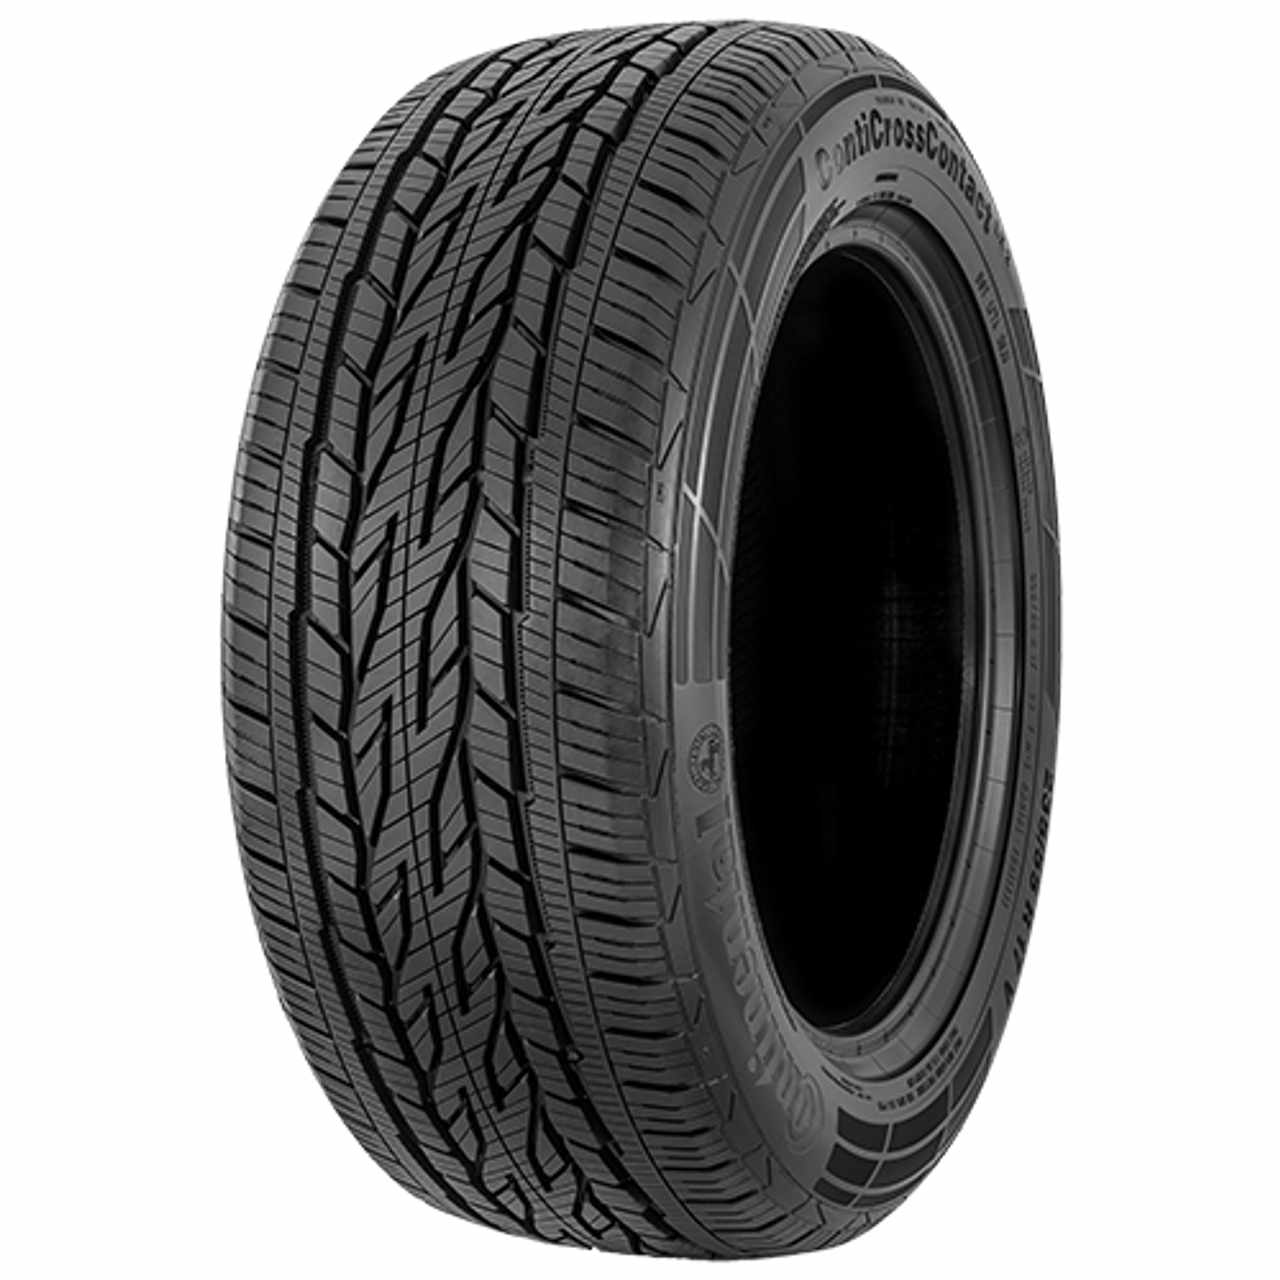 CONTINENTAL CONTICROSSCONTACT LX 2 (EVc) 285/60R18 116V FR BSW von Continental